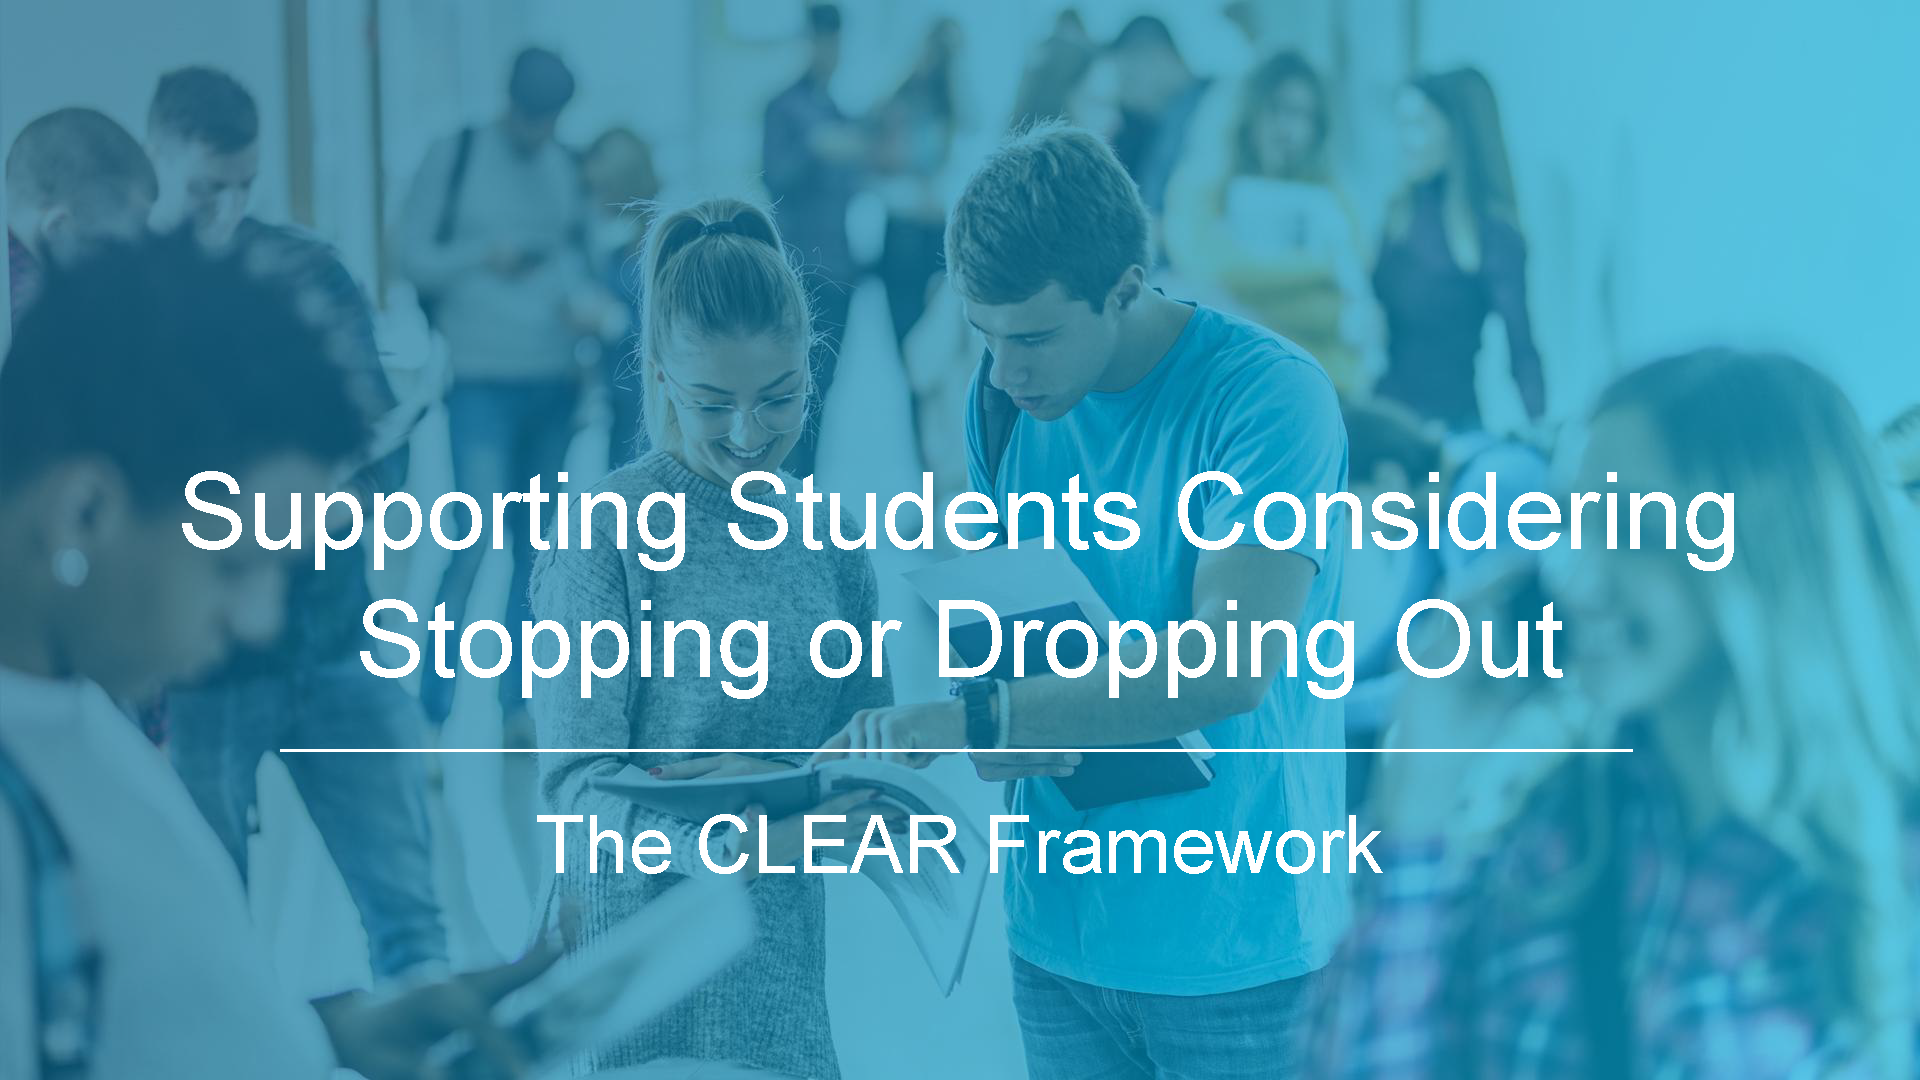 SupportingStudentsConsideringStoppingDroppingOut_TheCLEARFramework_Cover